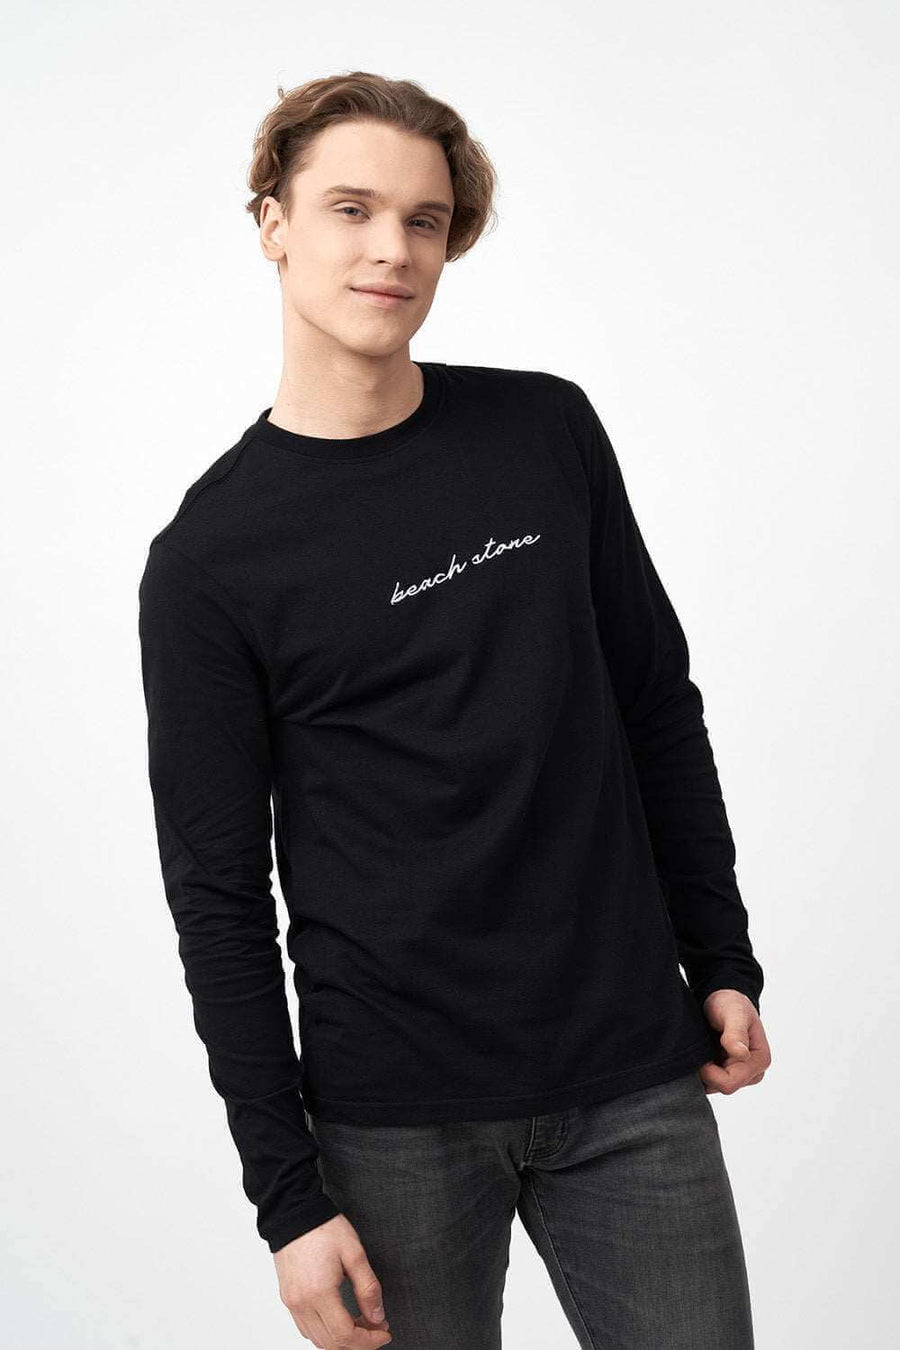 Front View of Long Sleeve Men's Shirts in Black with Embroidered Logo